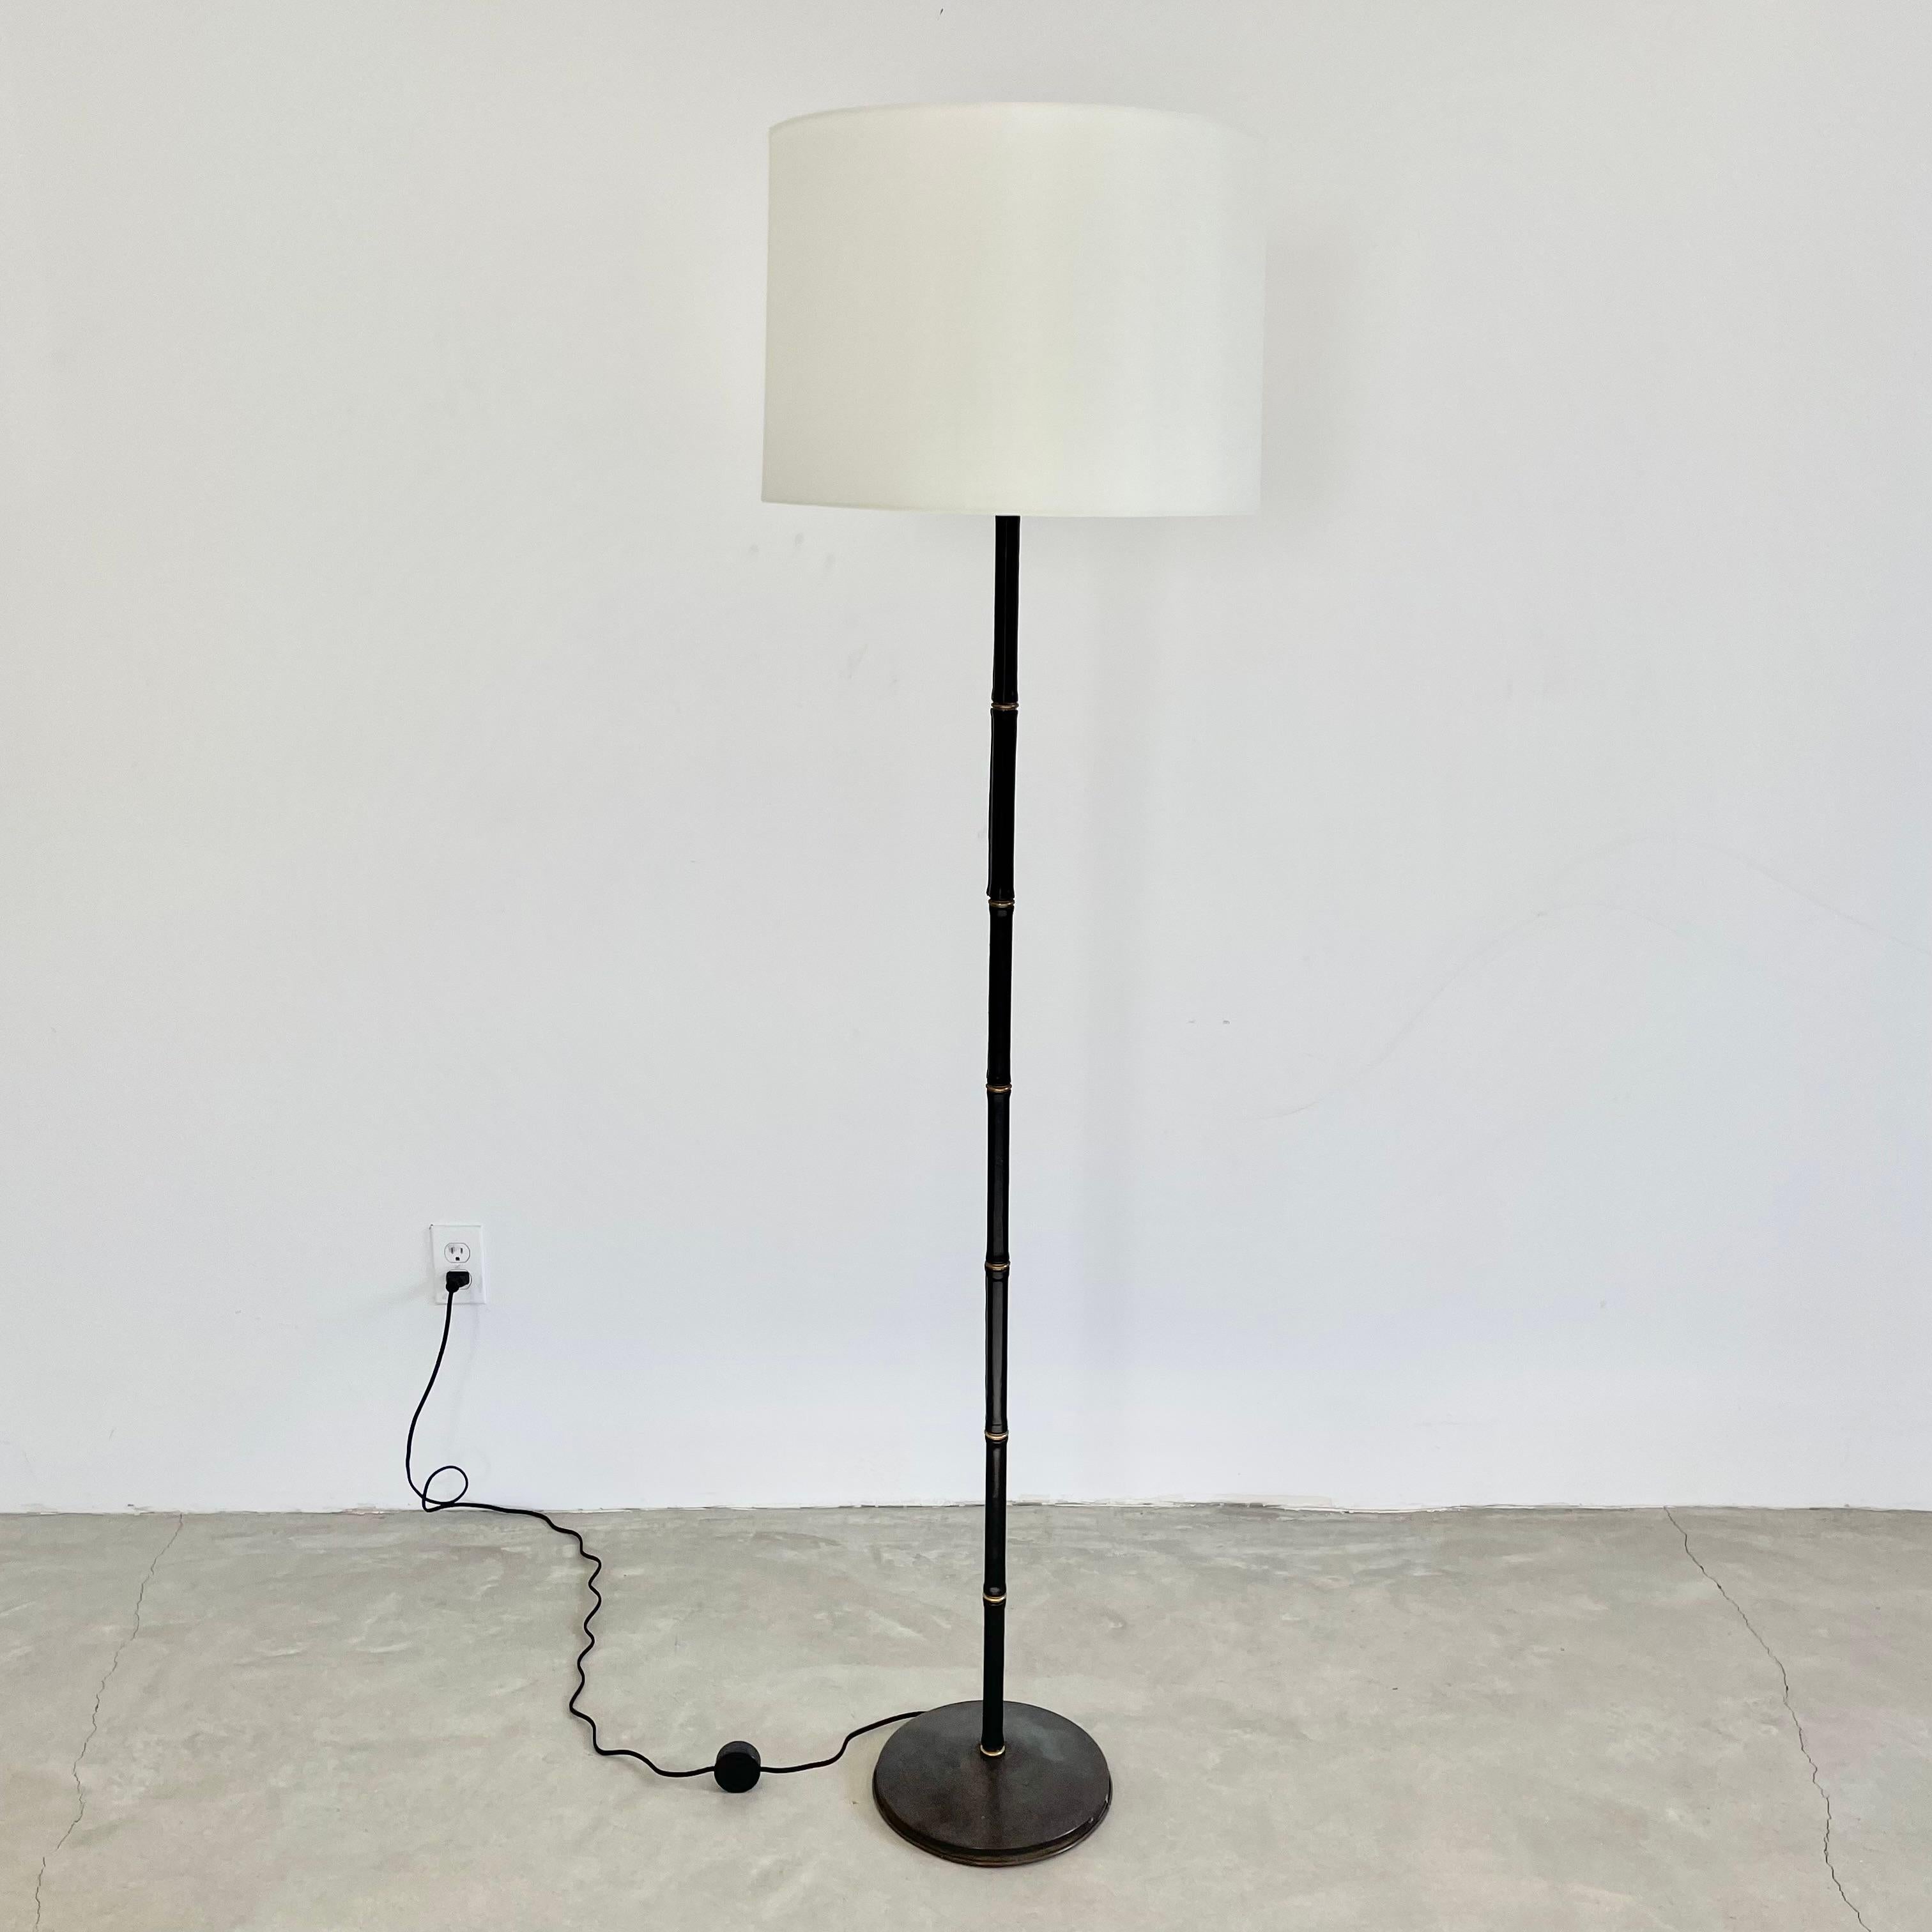 Handsome floor lamp completely wrapped in a black leather by French designer Jacques Adnet. Made in France in the 1950s. Just under 5.5 feet tall. Leather covers stem with brass ring accents in a way that gives a bamboo look to the lamp. Signature